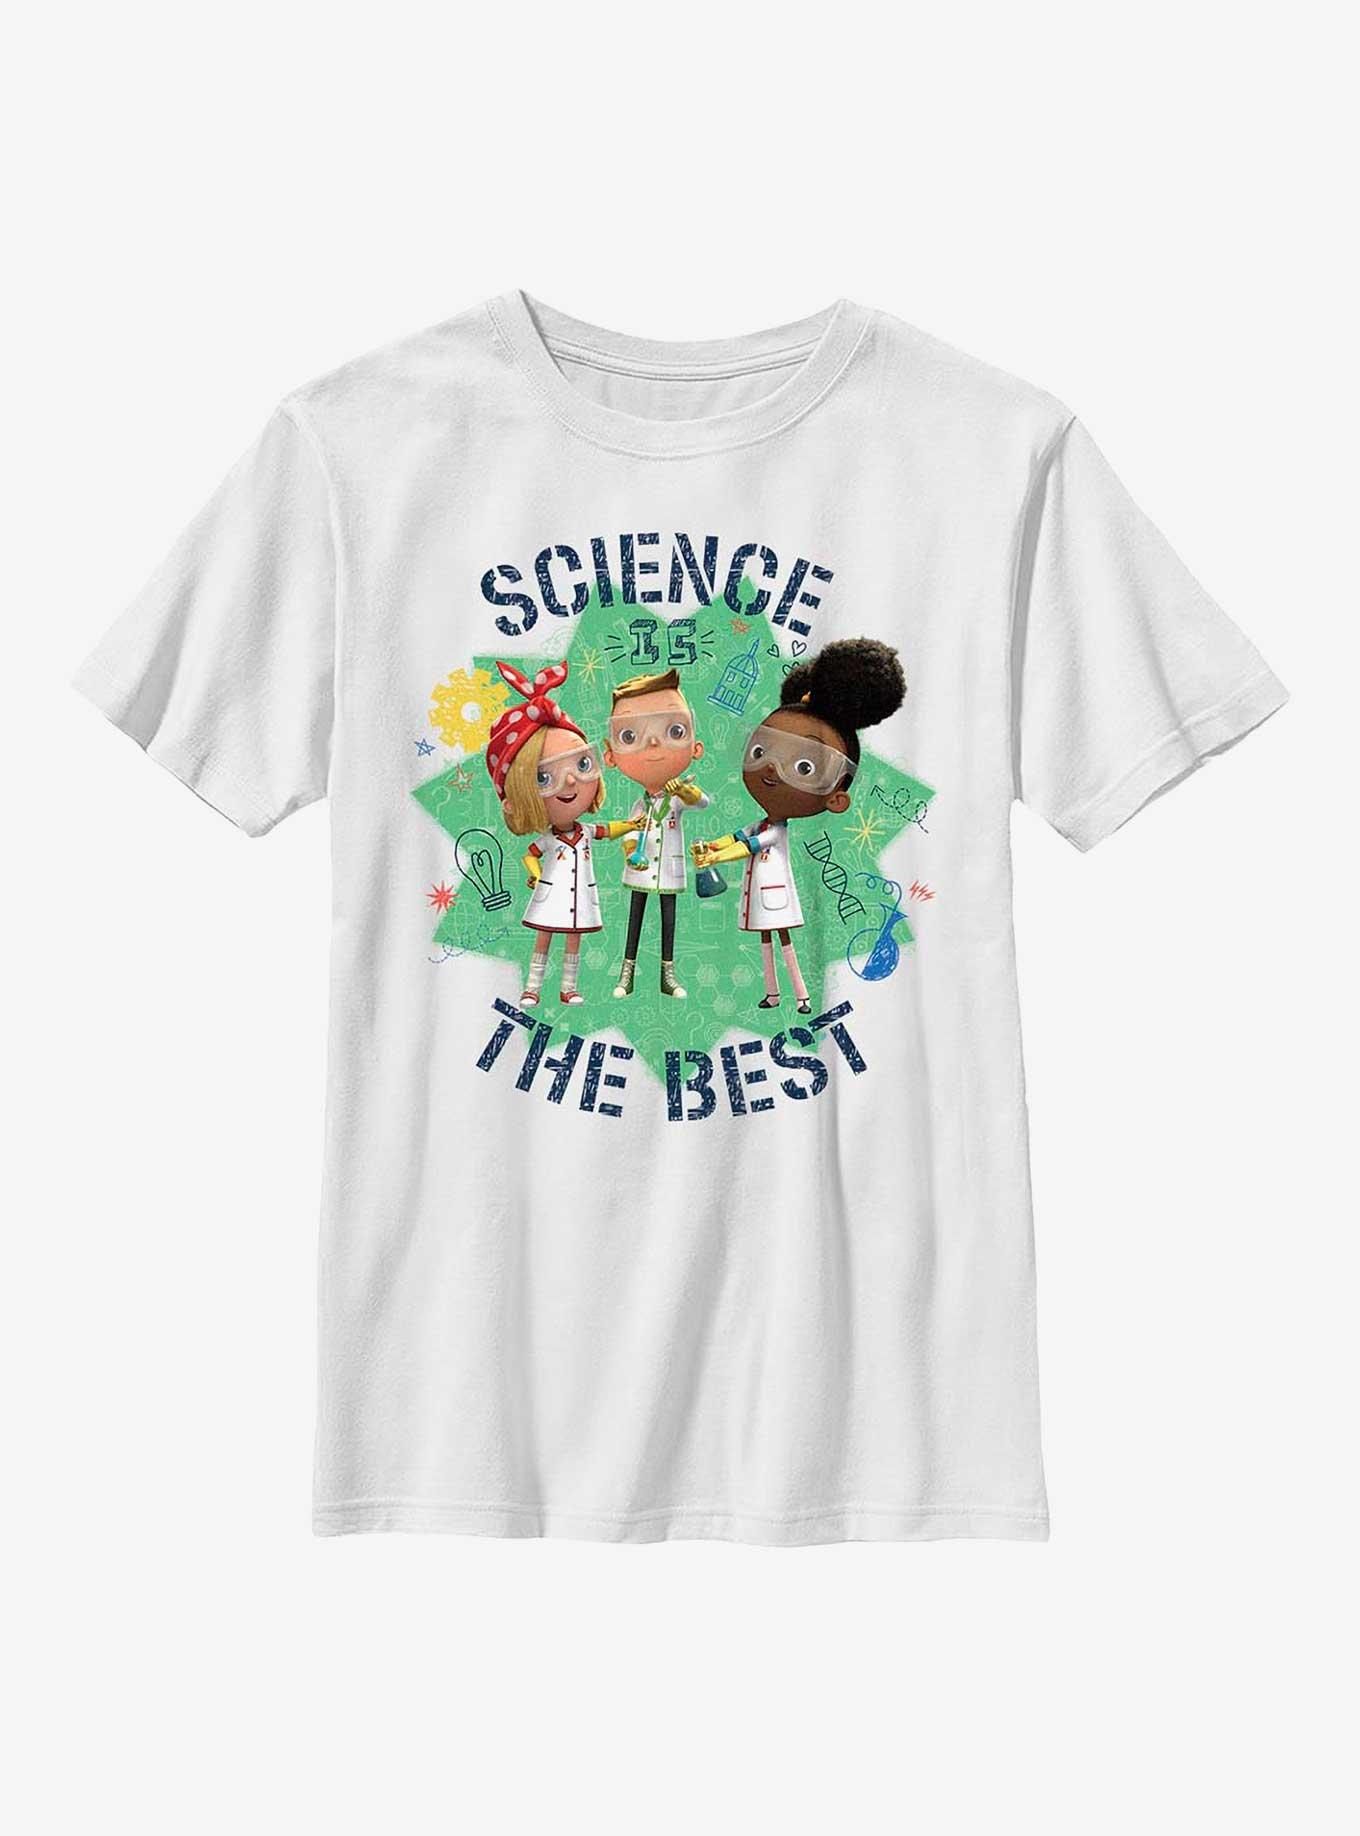 Ada Twist, Scientist Science Is The Best Youth T-Shirt, WHITE, hi-res